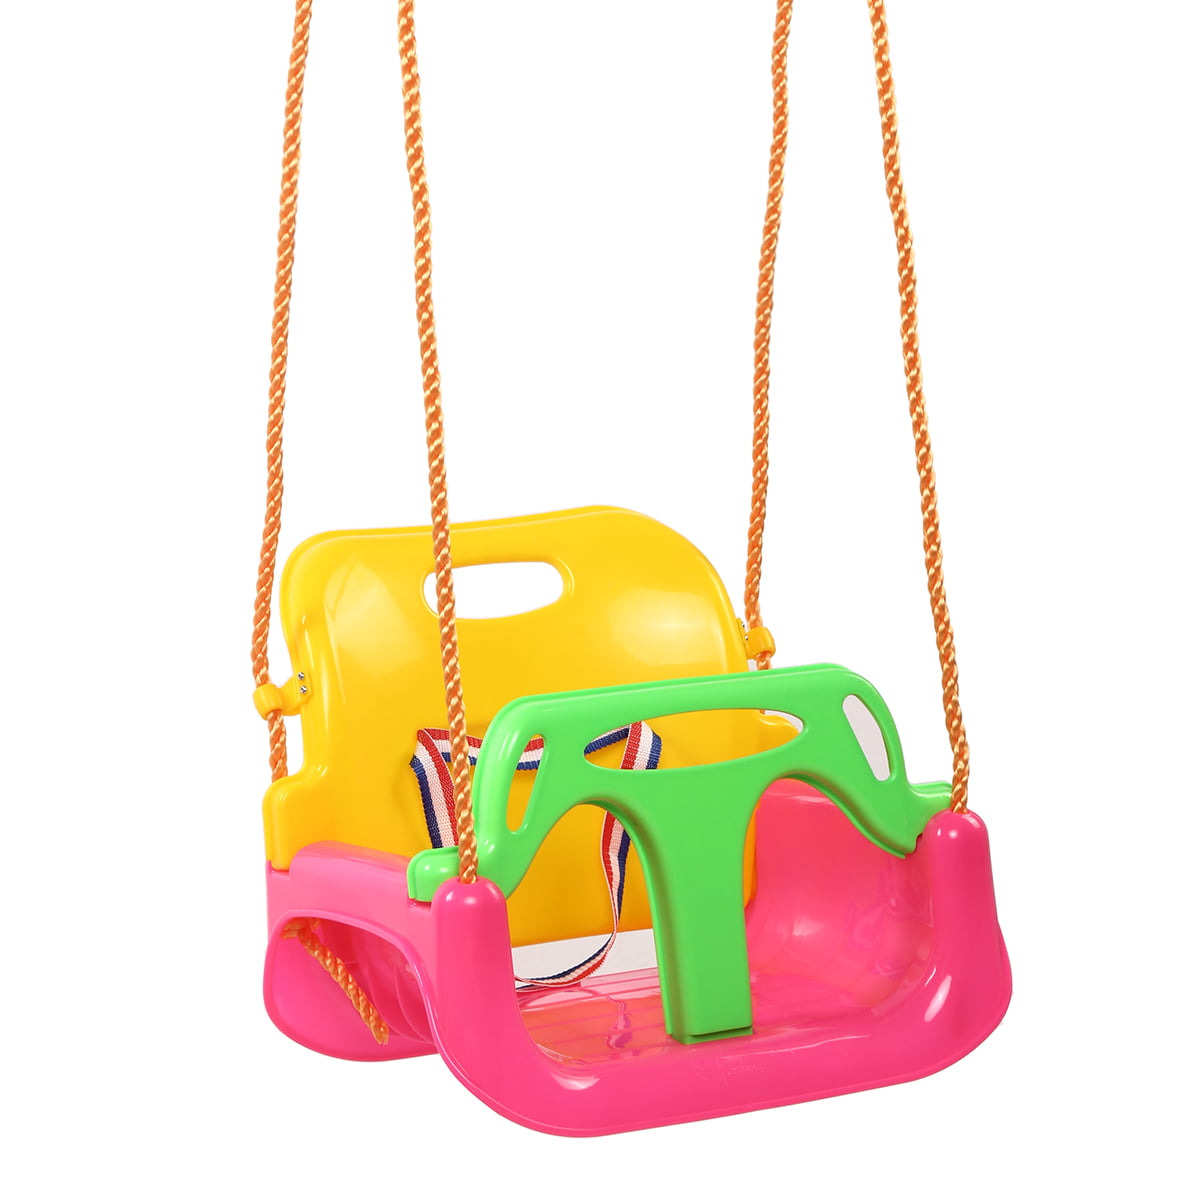 Toyfun 3 in 1 Safe Swing Seat High Backed Detachable Outdoor Hanging Seat for Toddlers Children 